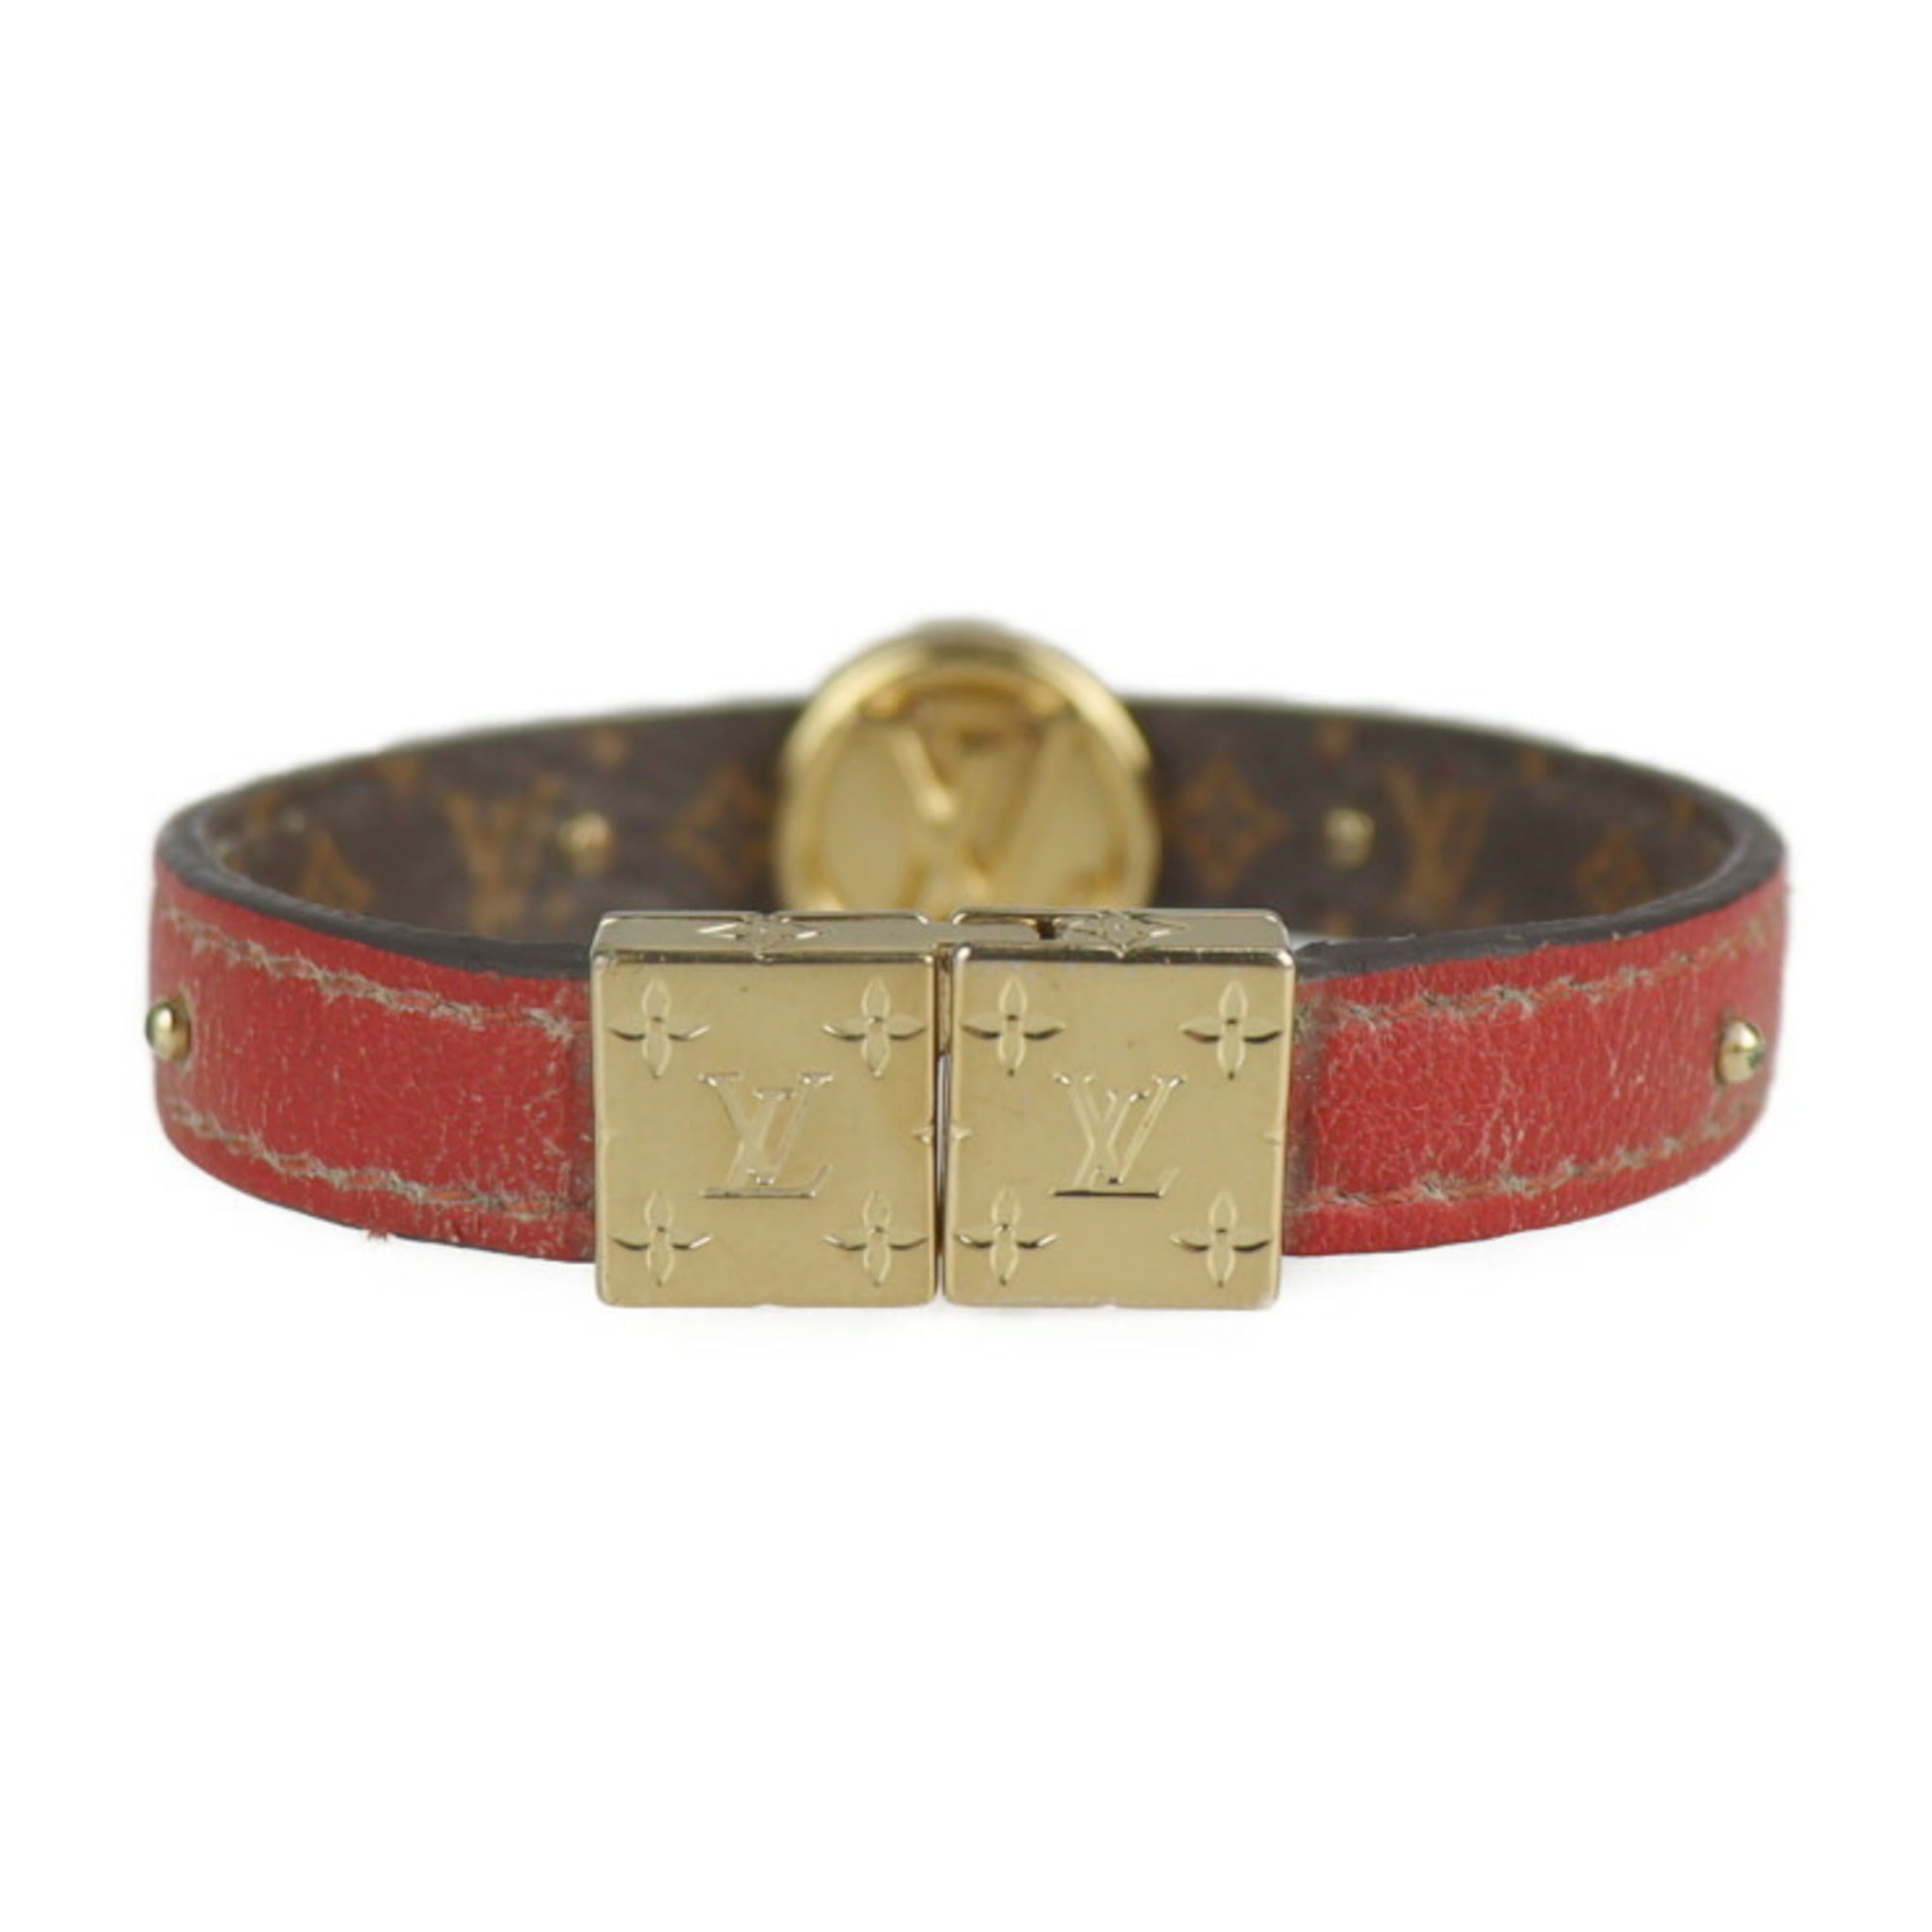 Bracelet Louis Vuitton Red in gold and steel - 33639127